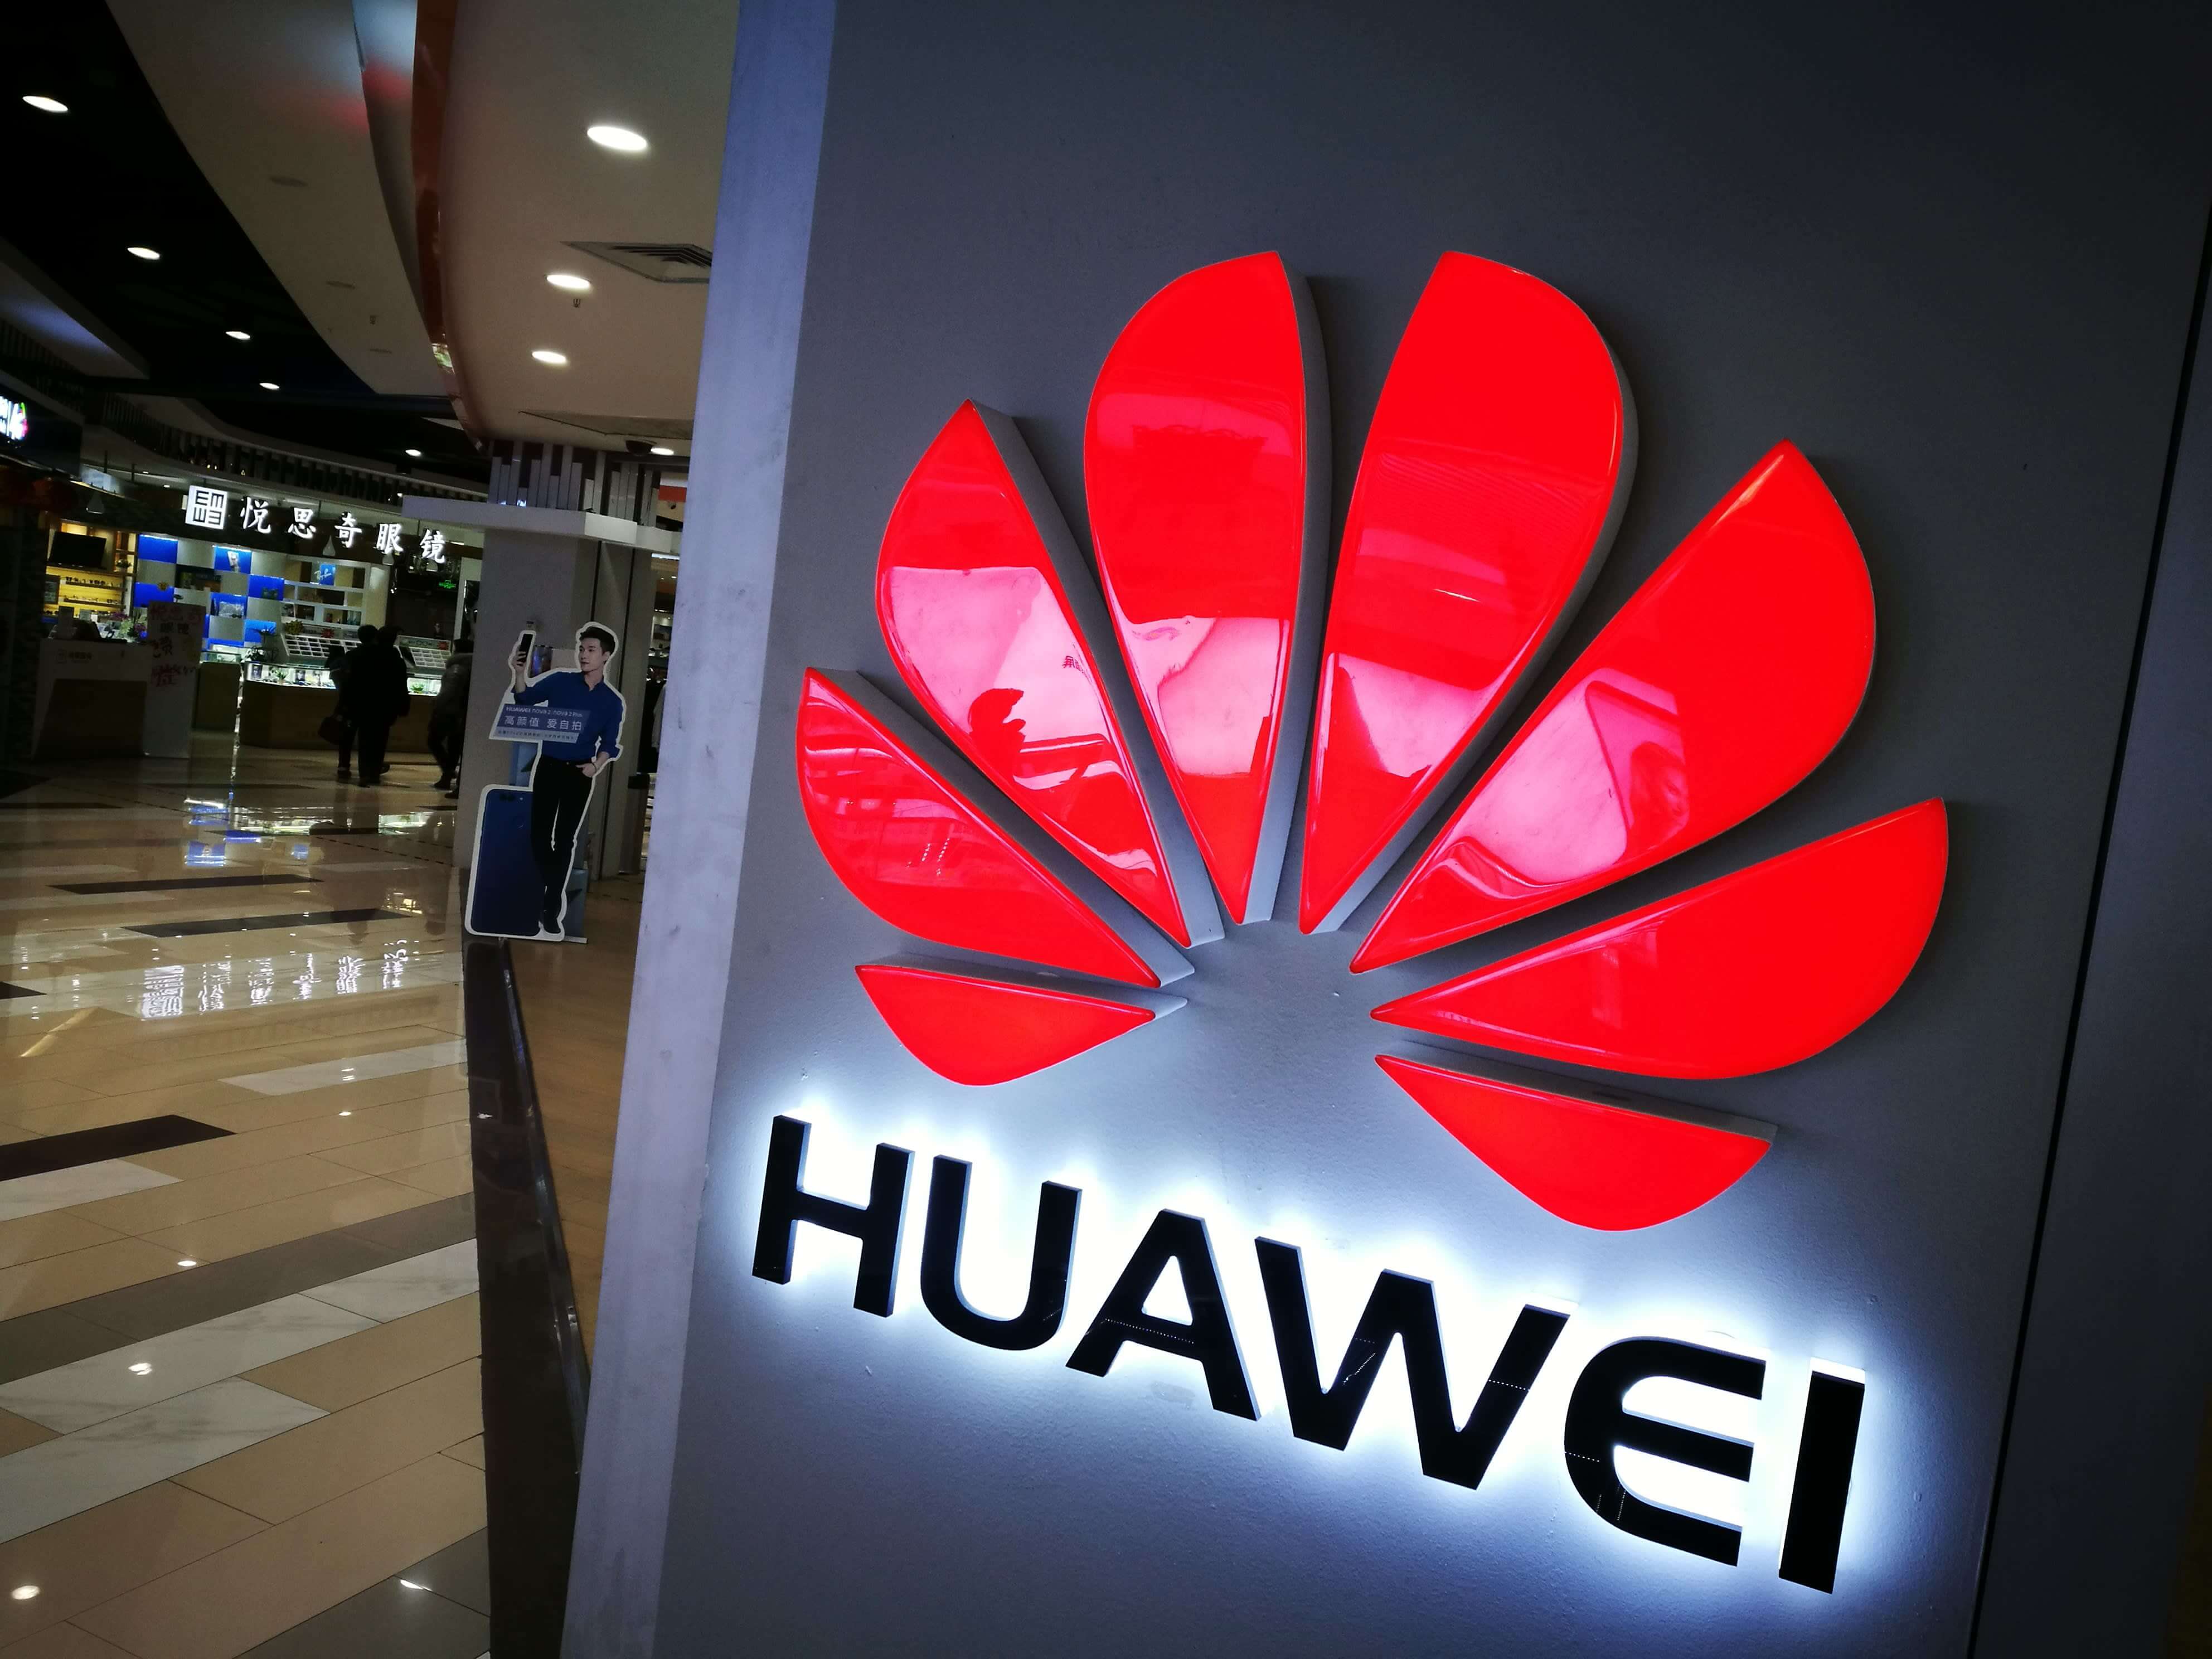 US says it has evidence that Huawei can spy on mobile networks